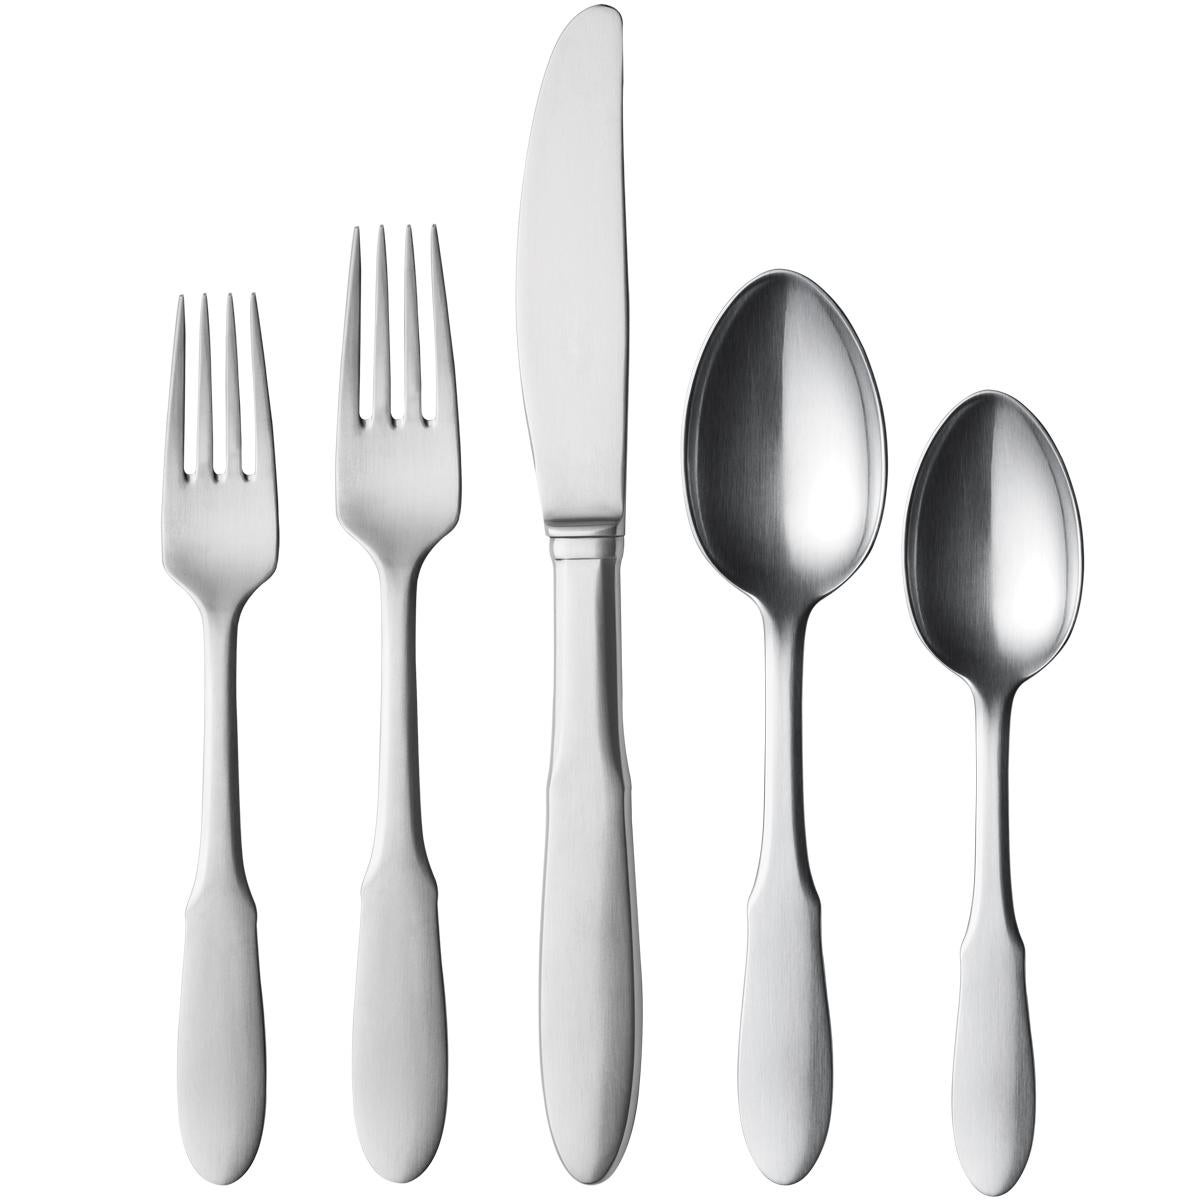 Stainless steel cutlery set with a dinner fork, dinner spoon, long dinner knife, starter fork and tea spoon.